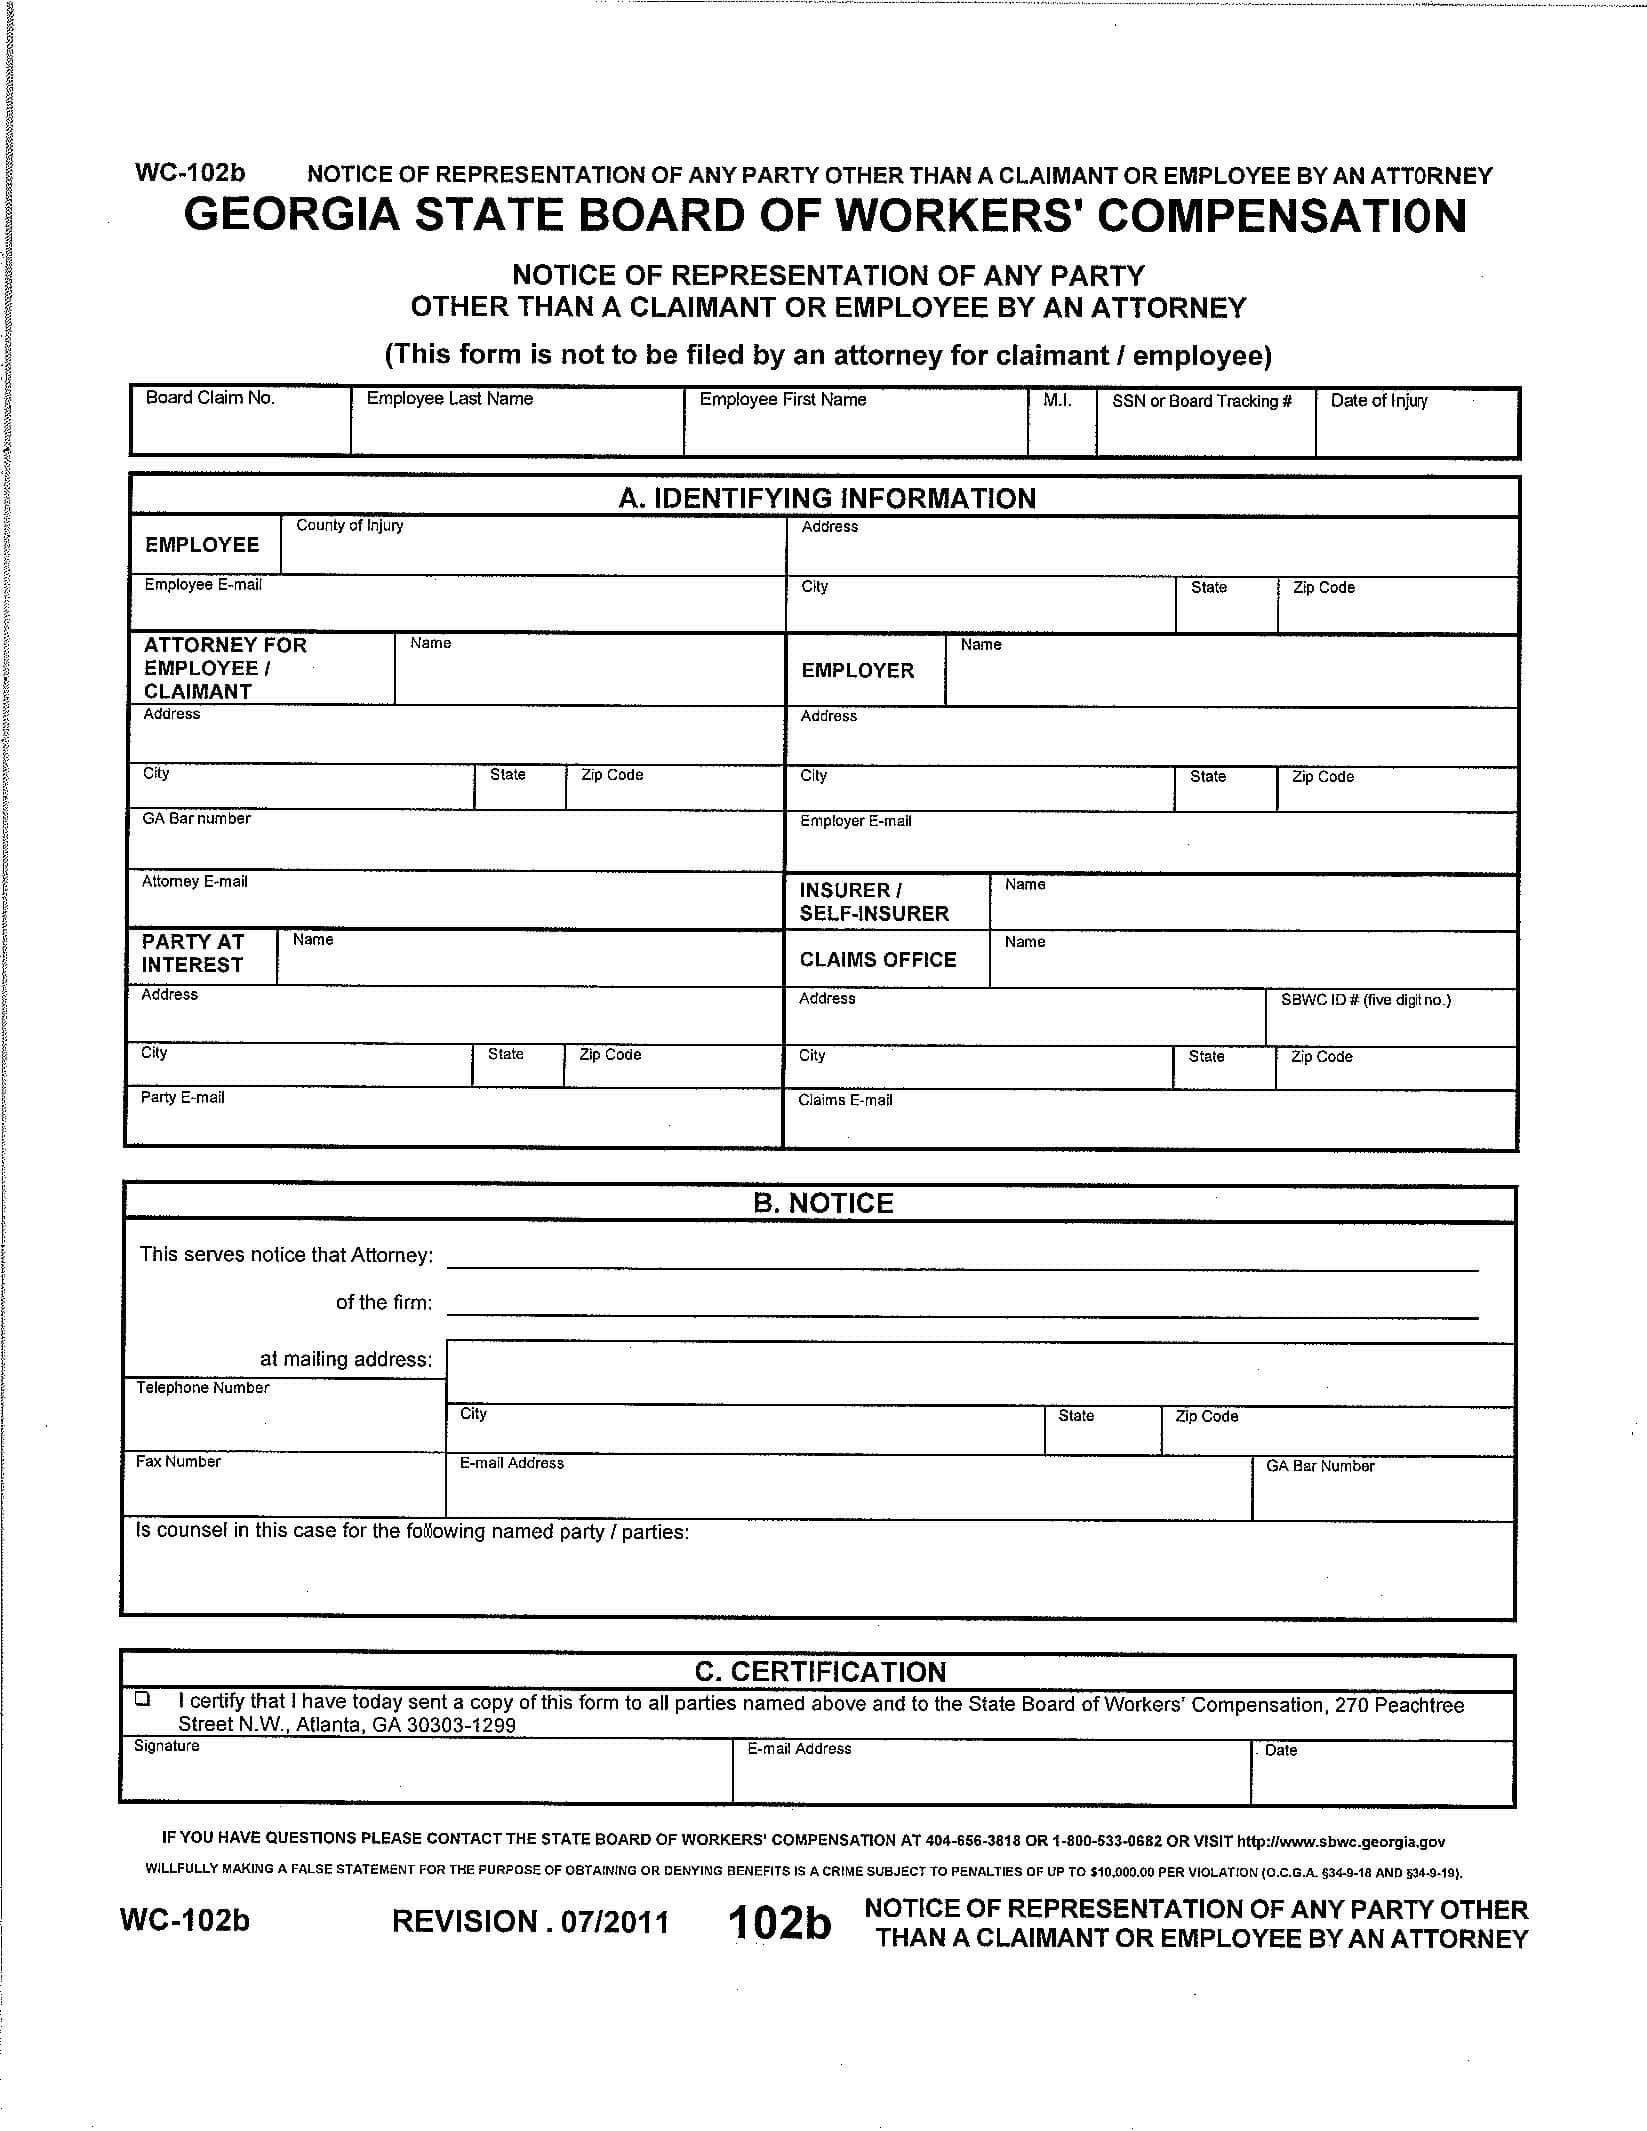 Georgia Workers' Compensation Forms WC-102 and WC-108